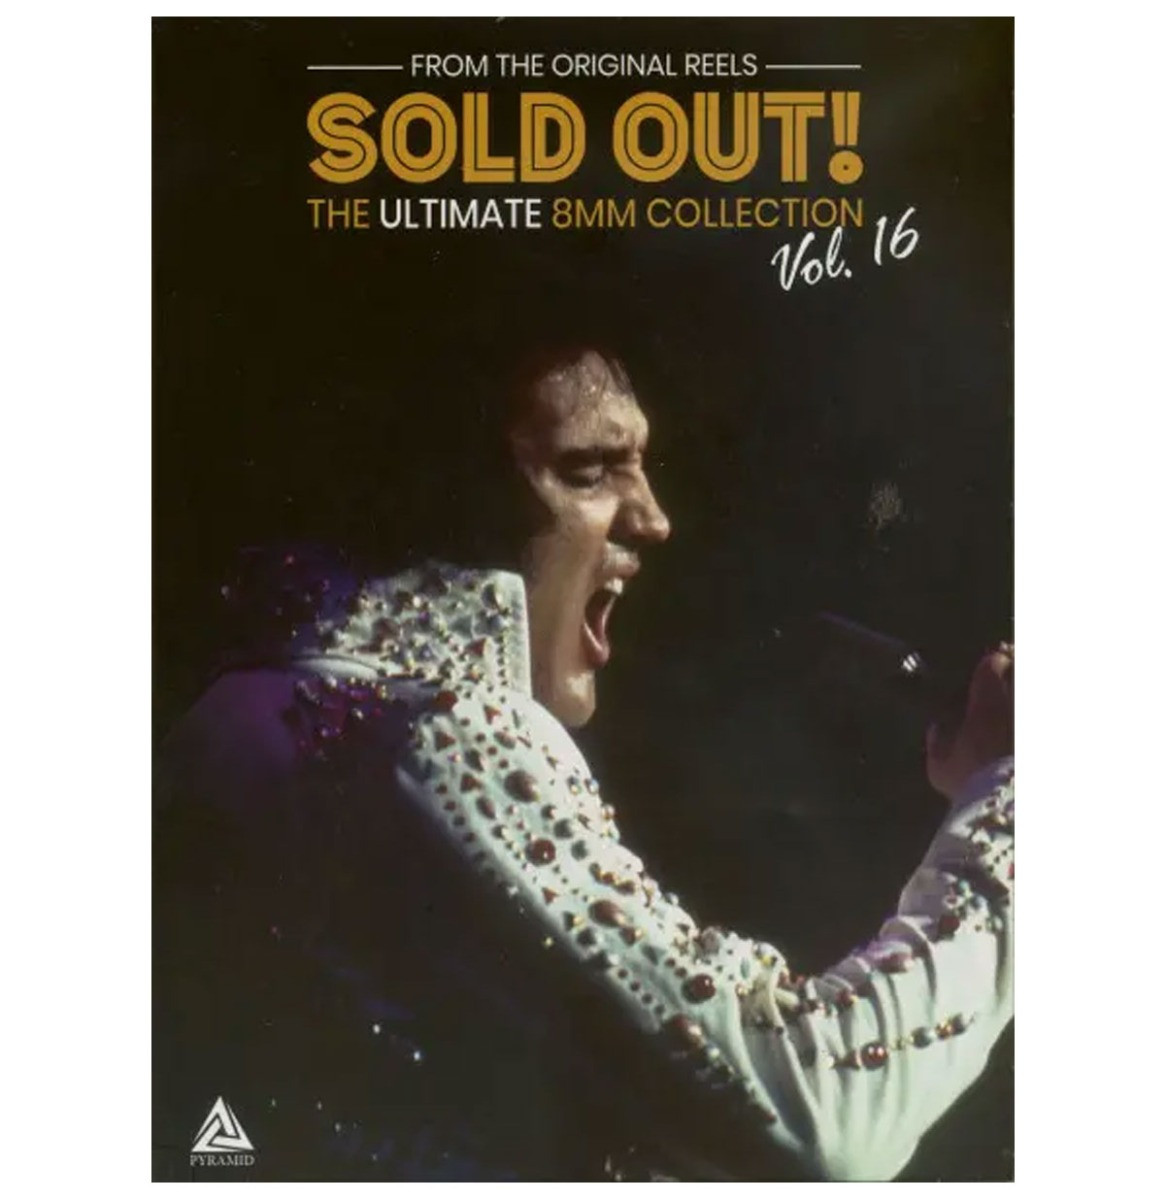 Elvis Presley: Sold Out! The Ultimate 8MM Collection Vol. 16 - 2 DVD Set